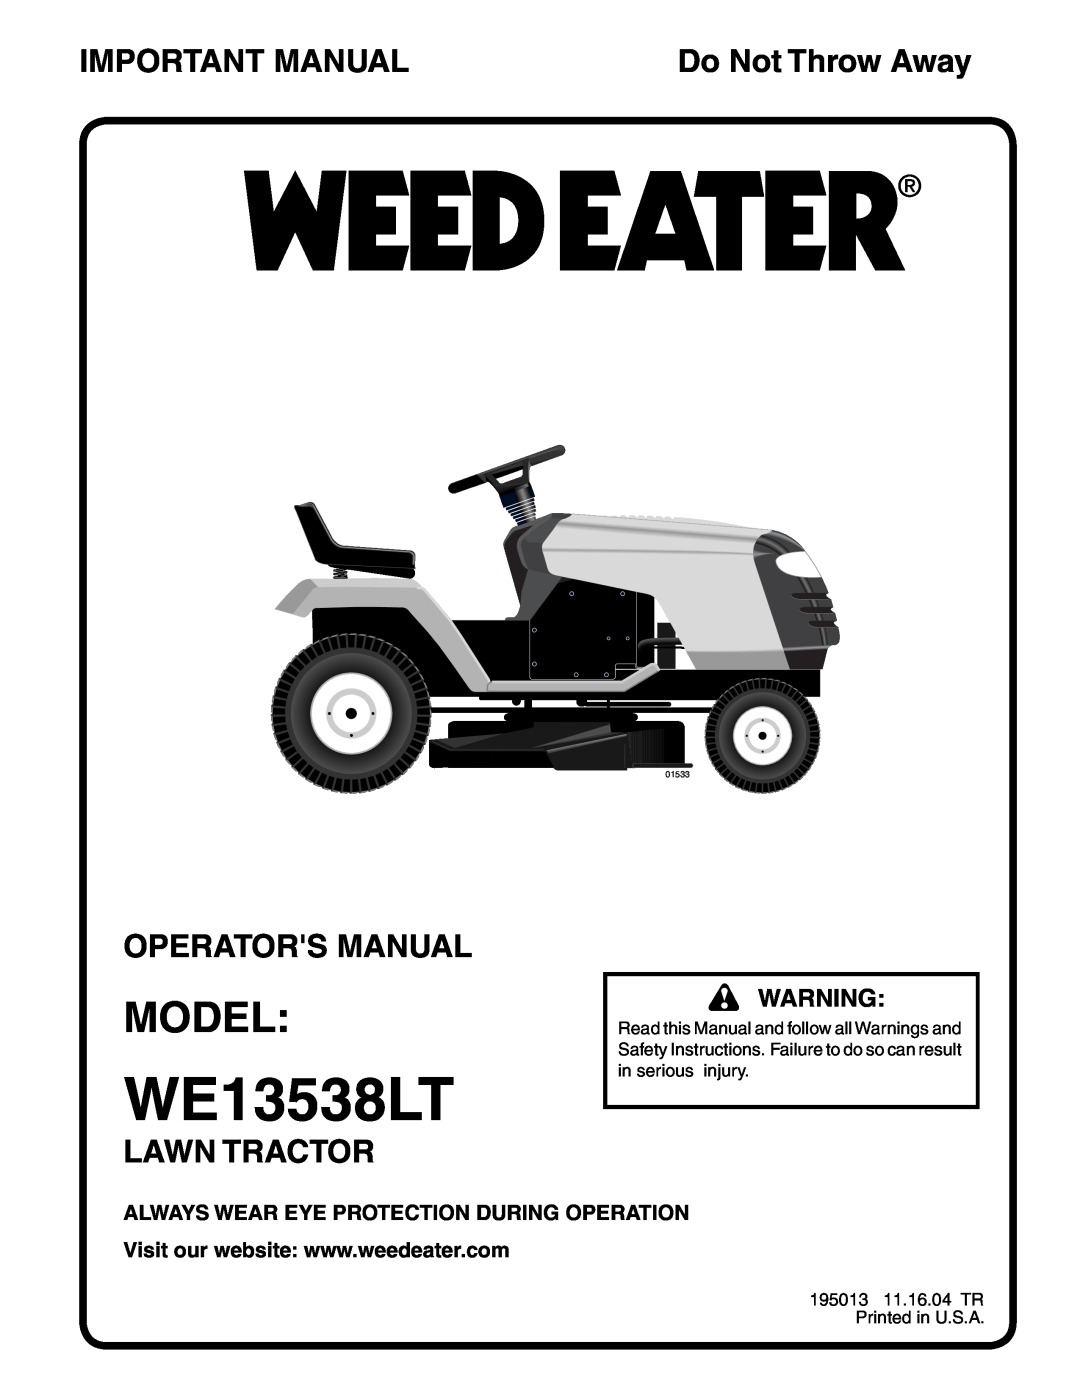 Weed Eater 195013 manual Model, Important Manual, Operators Manual, Lawn Tractor, WE13538LT, Do Not Throw Away, 01533 